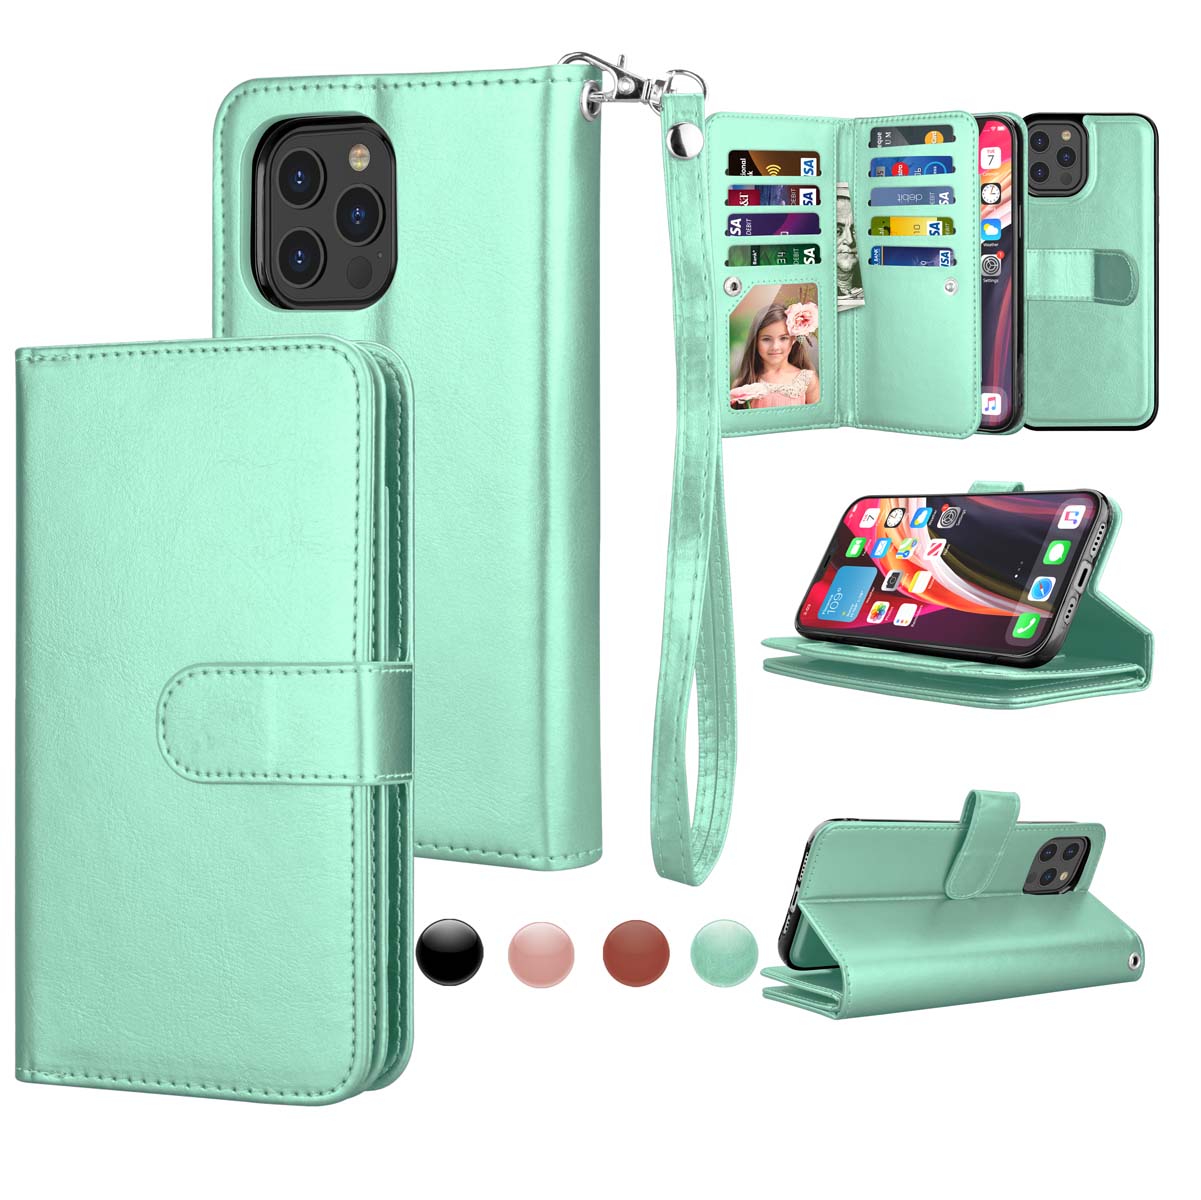 iPhone 12 Mini Case, Wallet Case iPhone 12, iPhone 12 Mini PU Leather Case, Njjex PU Leather Magnet Stand Wallet Credit Card Holder Flip Case 9 Card Slots Case for Apple iPhone 12 Mini 5.4" 2020 -Mint - image 1 of 6